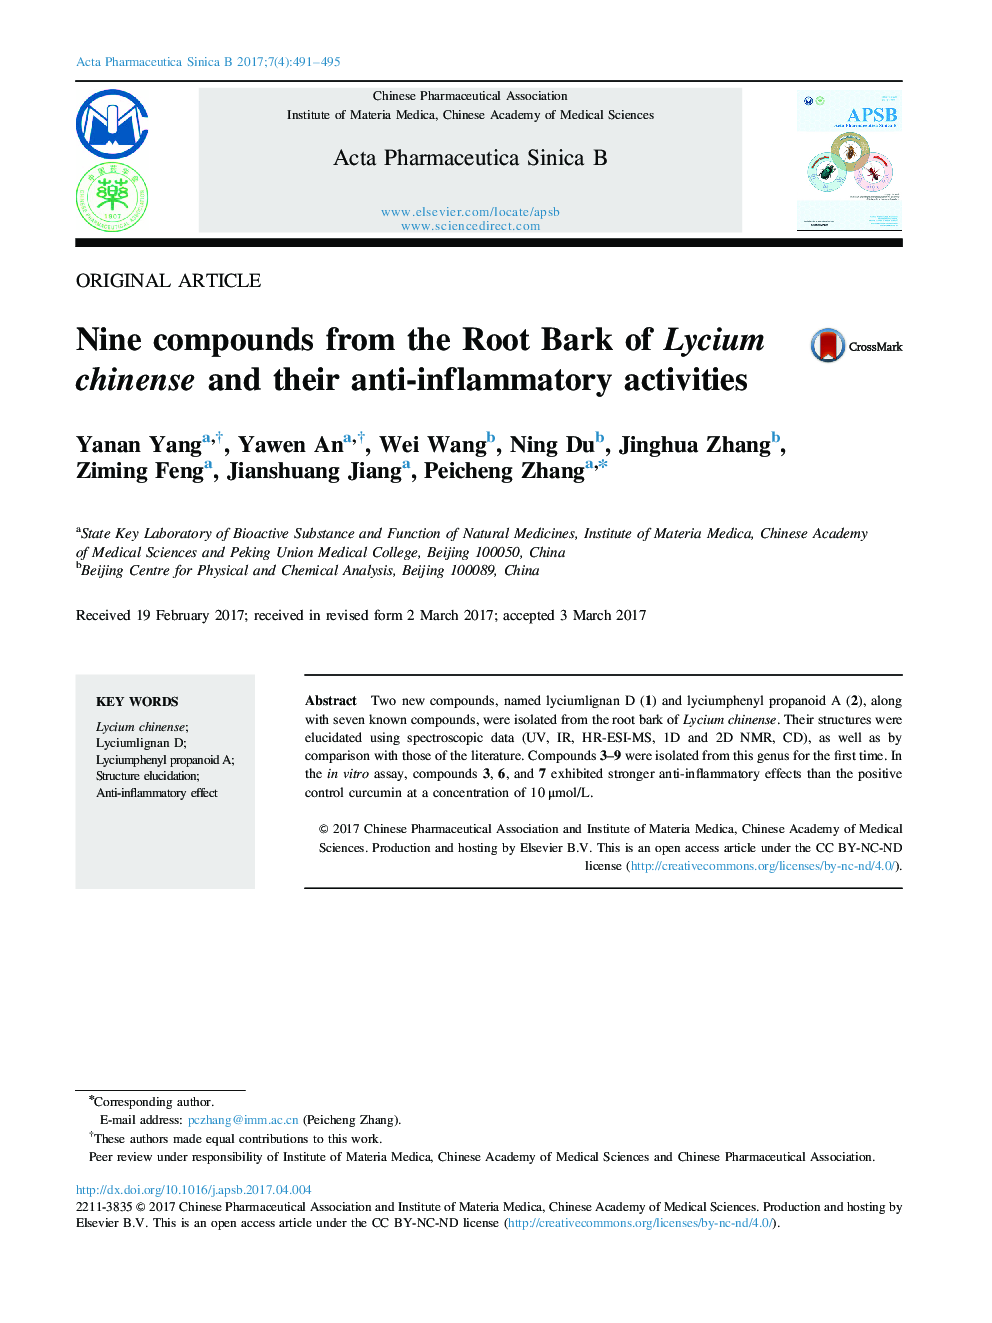 Nine compounds from the Root Bark of Lycium chinense and their anti-inflammatory activities